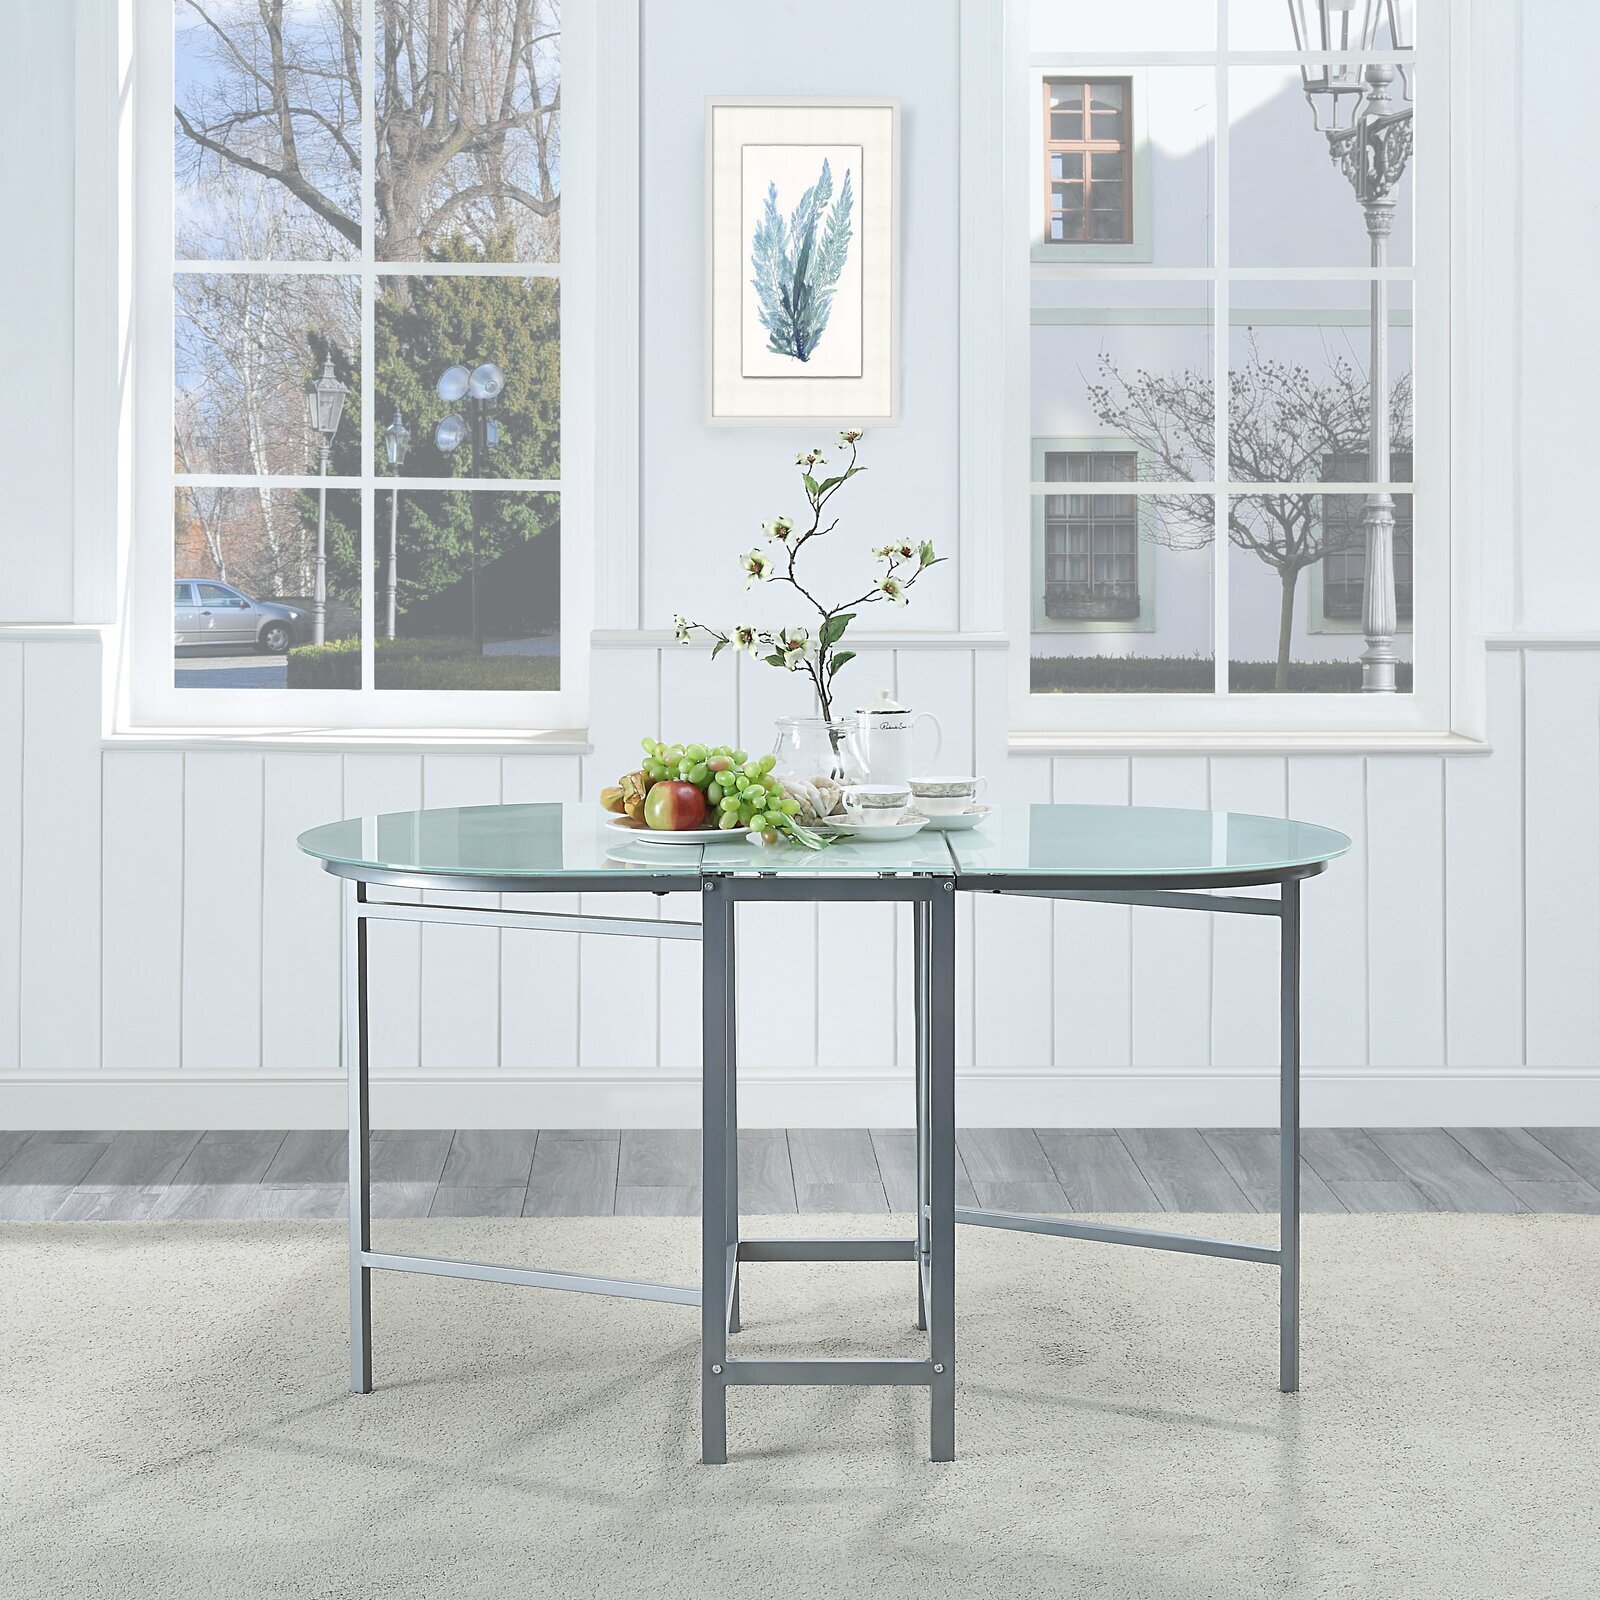 Iron folding table in an oval design